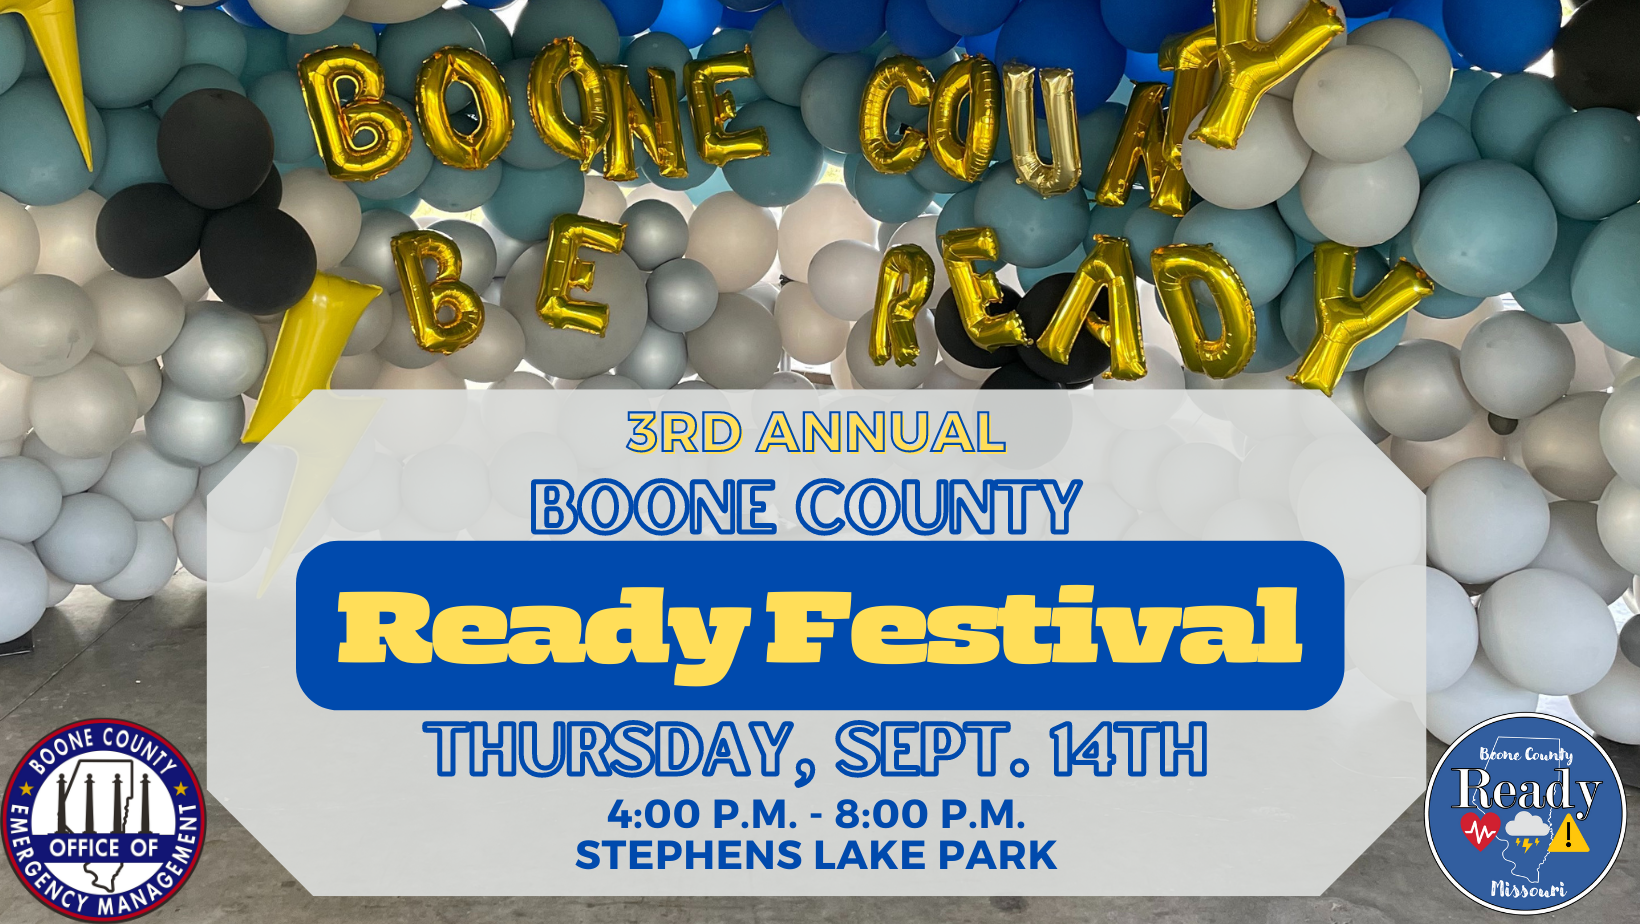 The Boone County Ready Festival, formerly titled Preparedness Fair, is being held at Stephens Lake Park on September 14th from 4pm - 8pm.